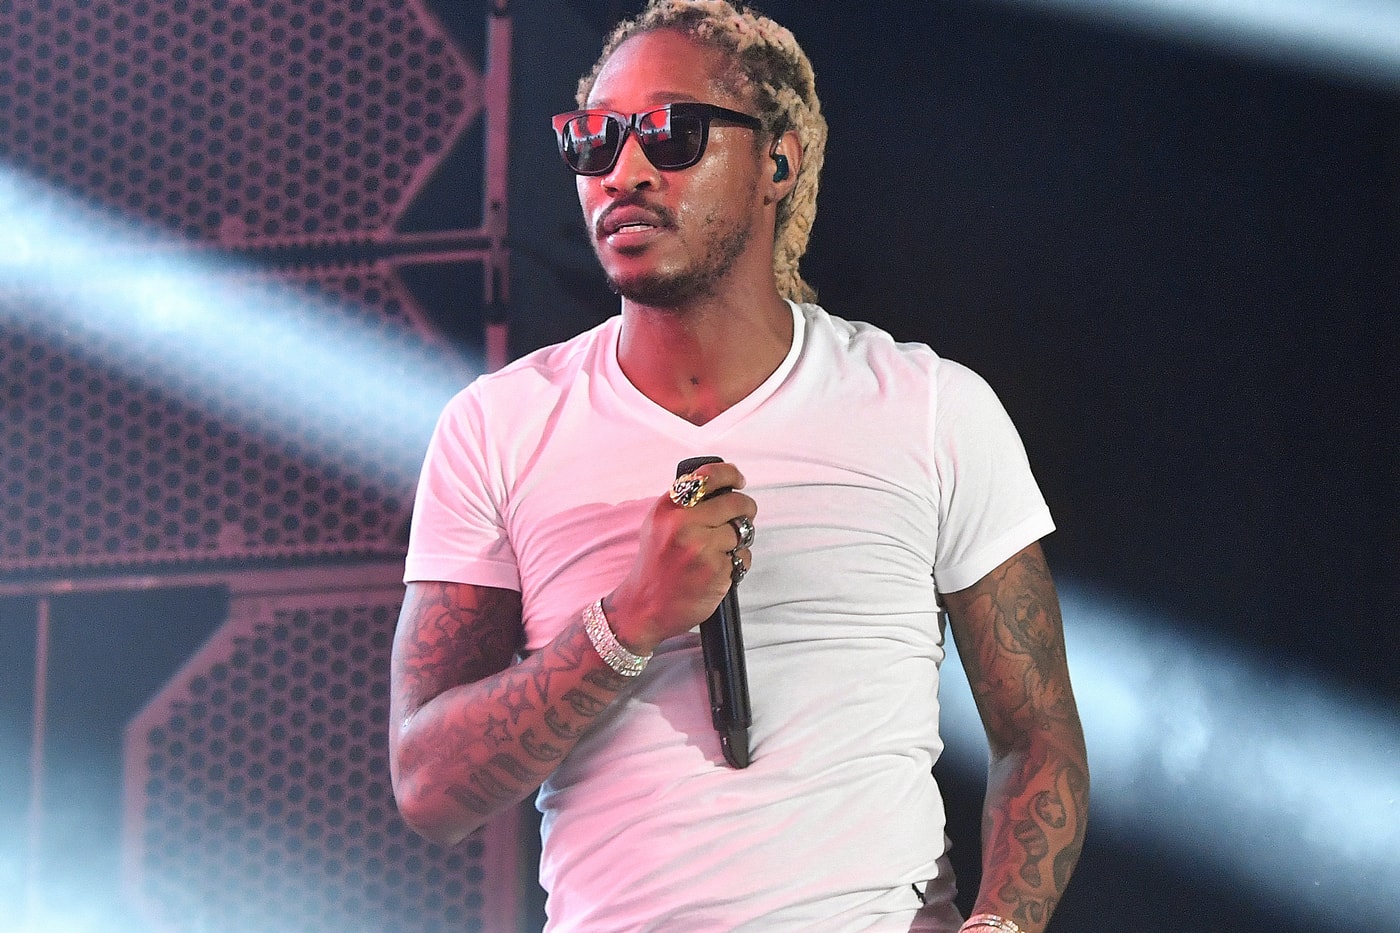 future-new-mixtape-forever-or-never-ty-dolla-sign-campaign